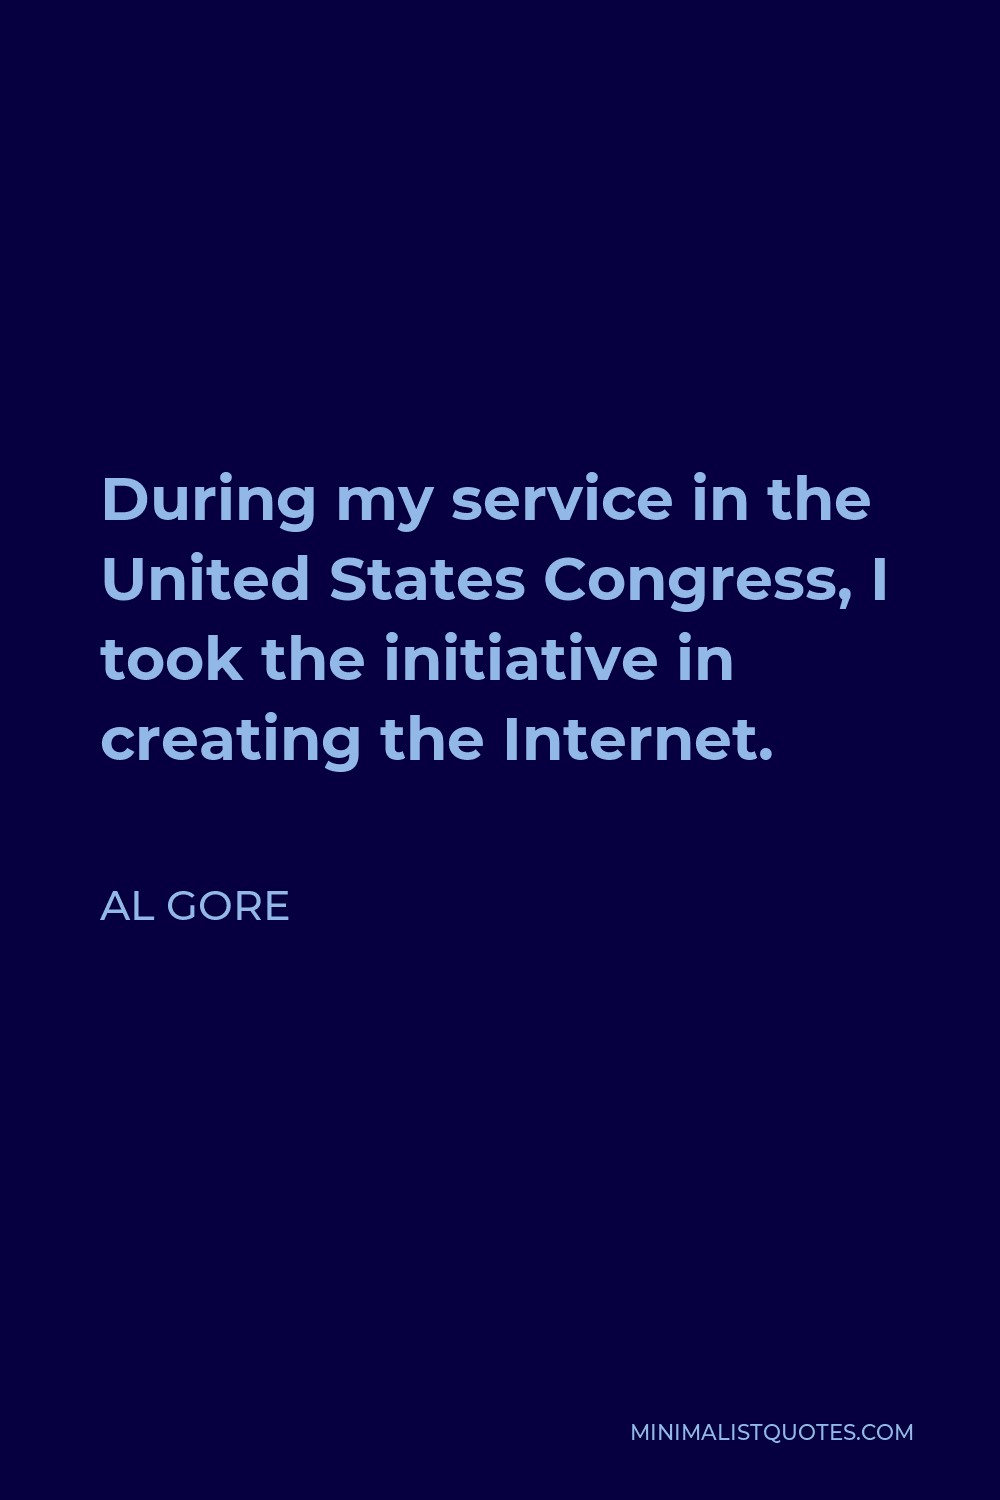 Al Gore Quote - During my service in the United States Congress, I took the initiative in creating the Internet.